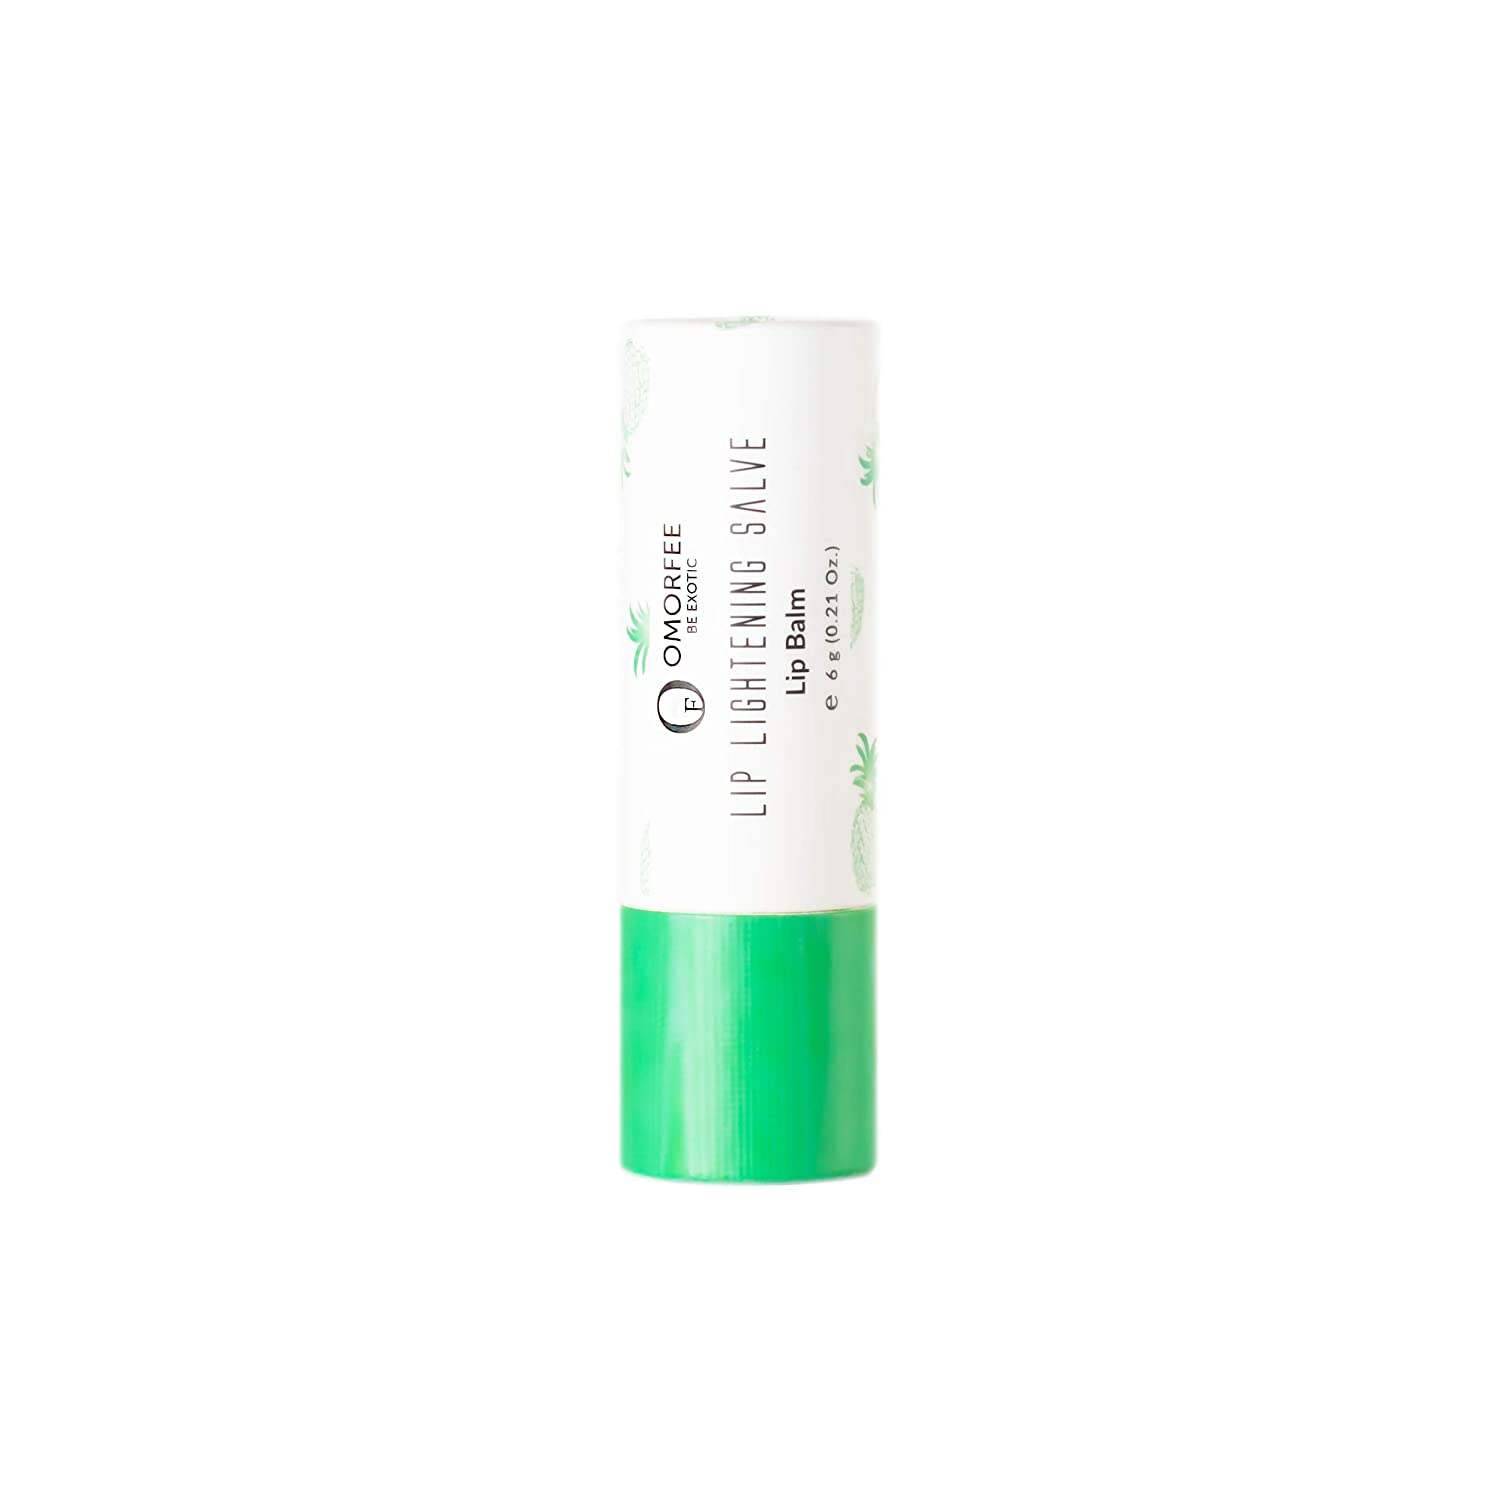 Omorfee 100% Organic Lip Lightening Stick for Dark Lips, Lip Whitening Lipstick with SPF, Natural Lip Balm Protection & Repair, Cocoa Butter, Carrot Seed Oil & Pineapple Extract - 6 Grams/0.21 Oz